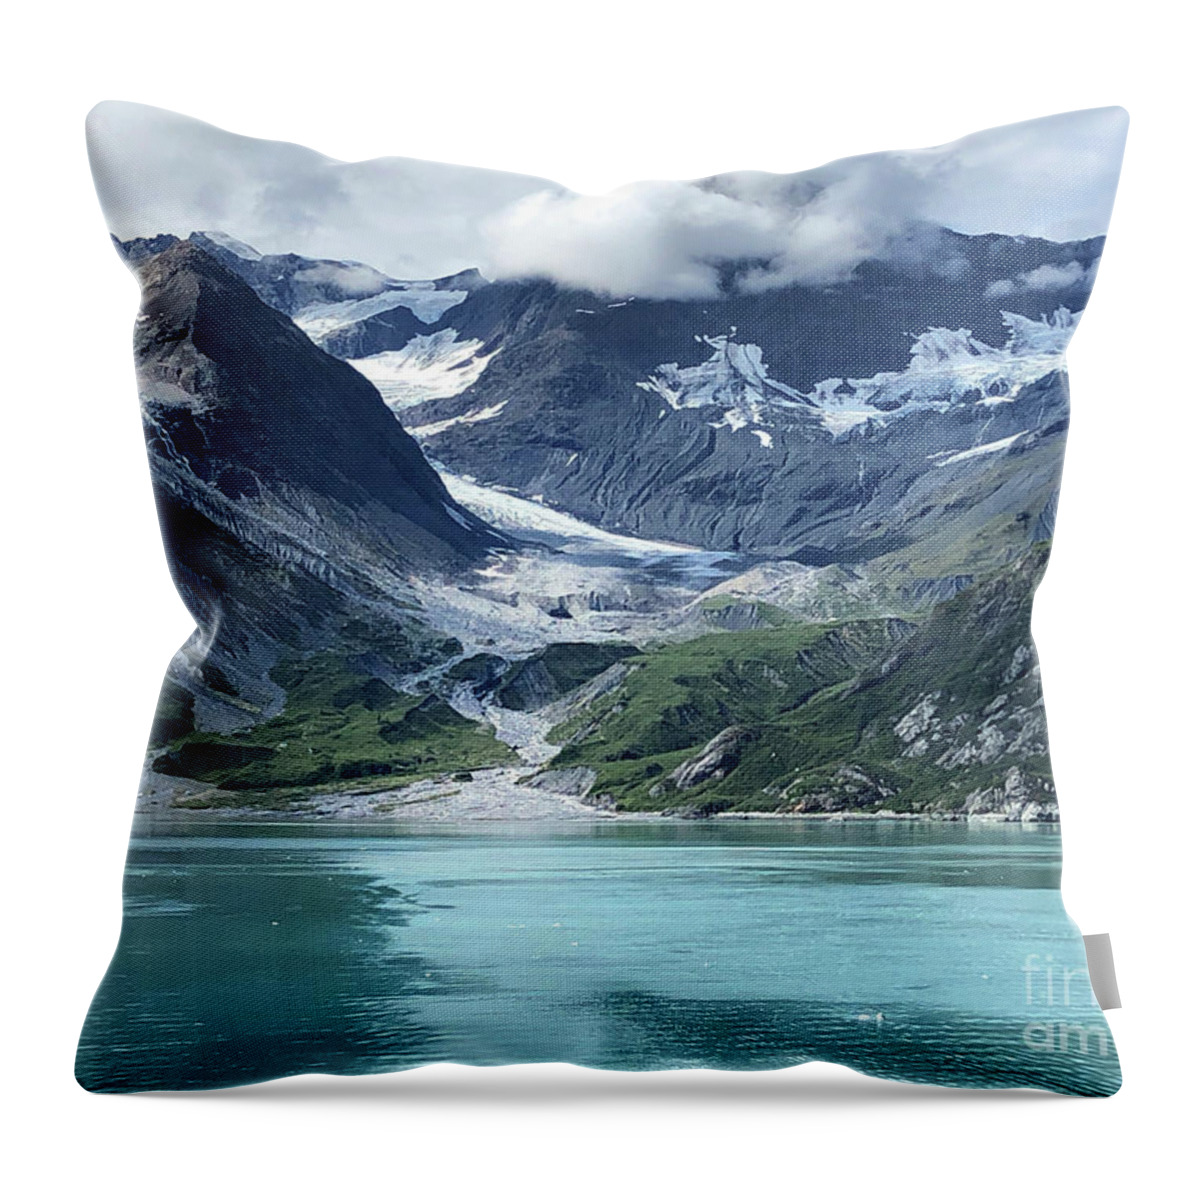 Mountains Throw Pillow featuring the photograph Alaska Glacier by Jeanette French